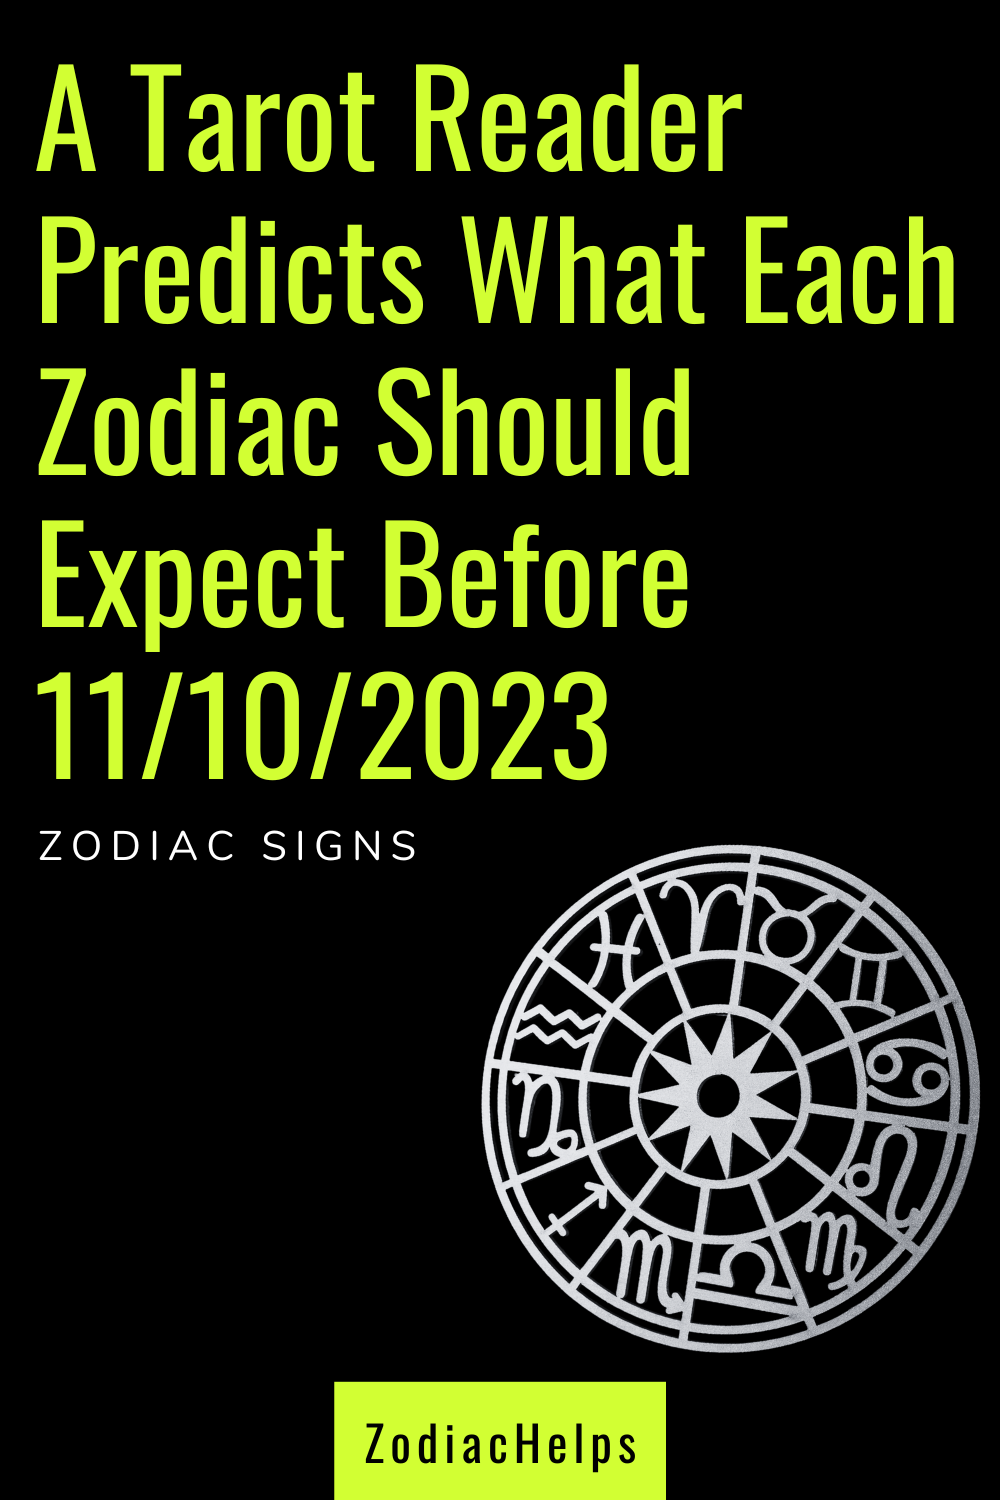 A Tarot Reader Predicts What Each Zodiac Should Expect Before 11102023